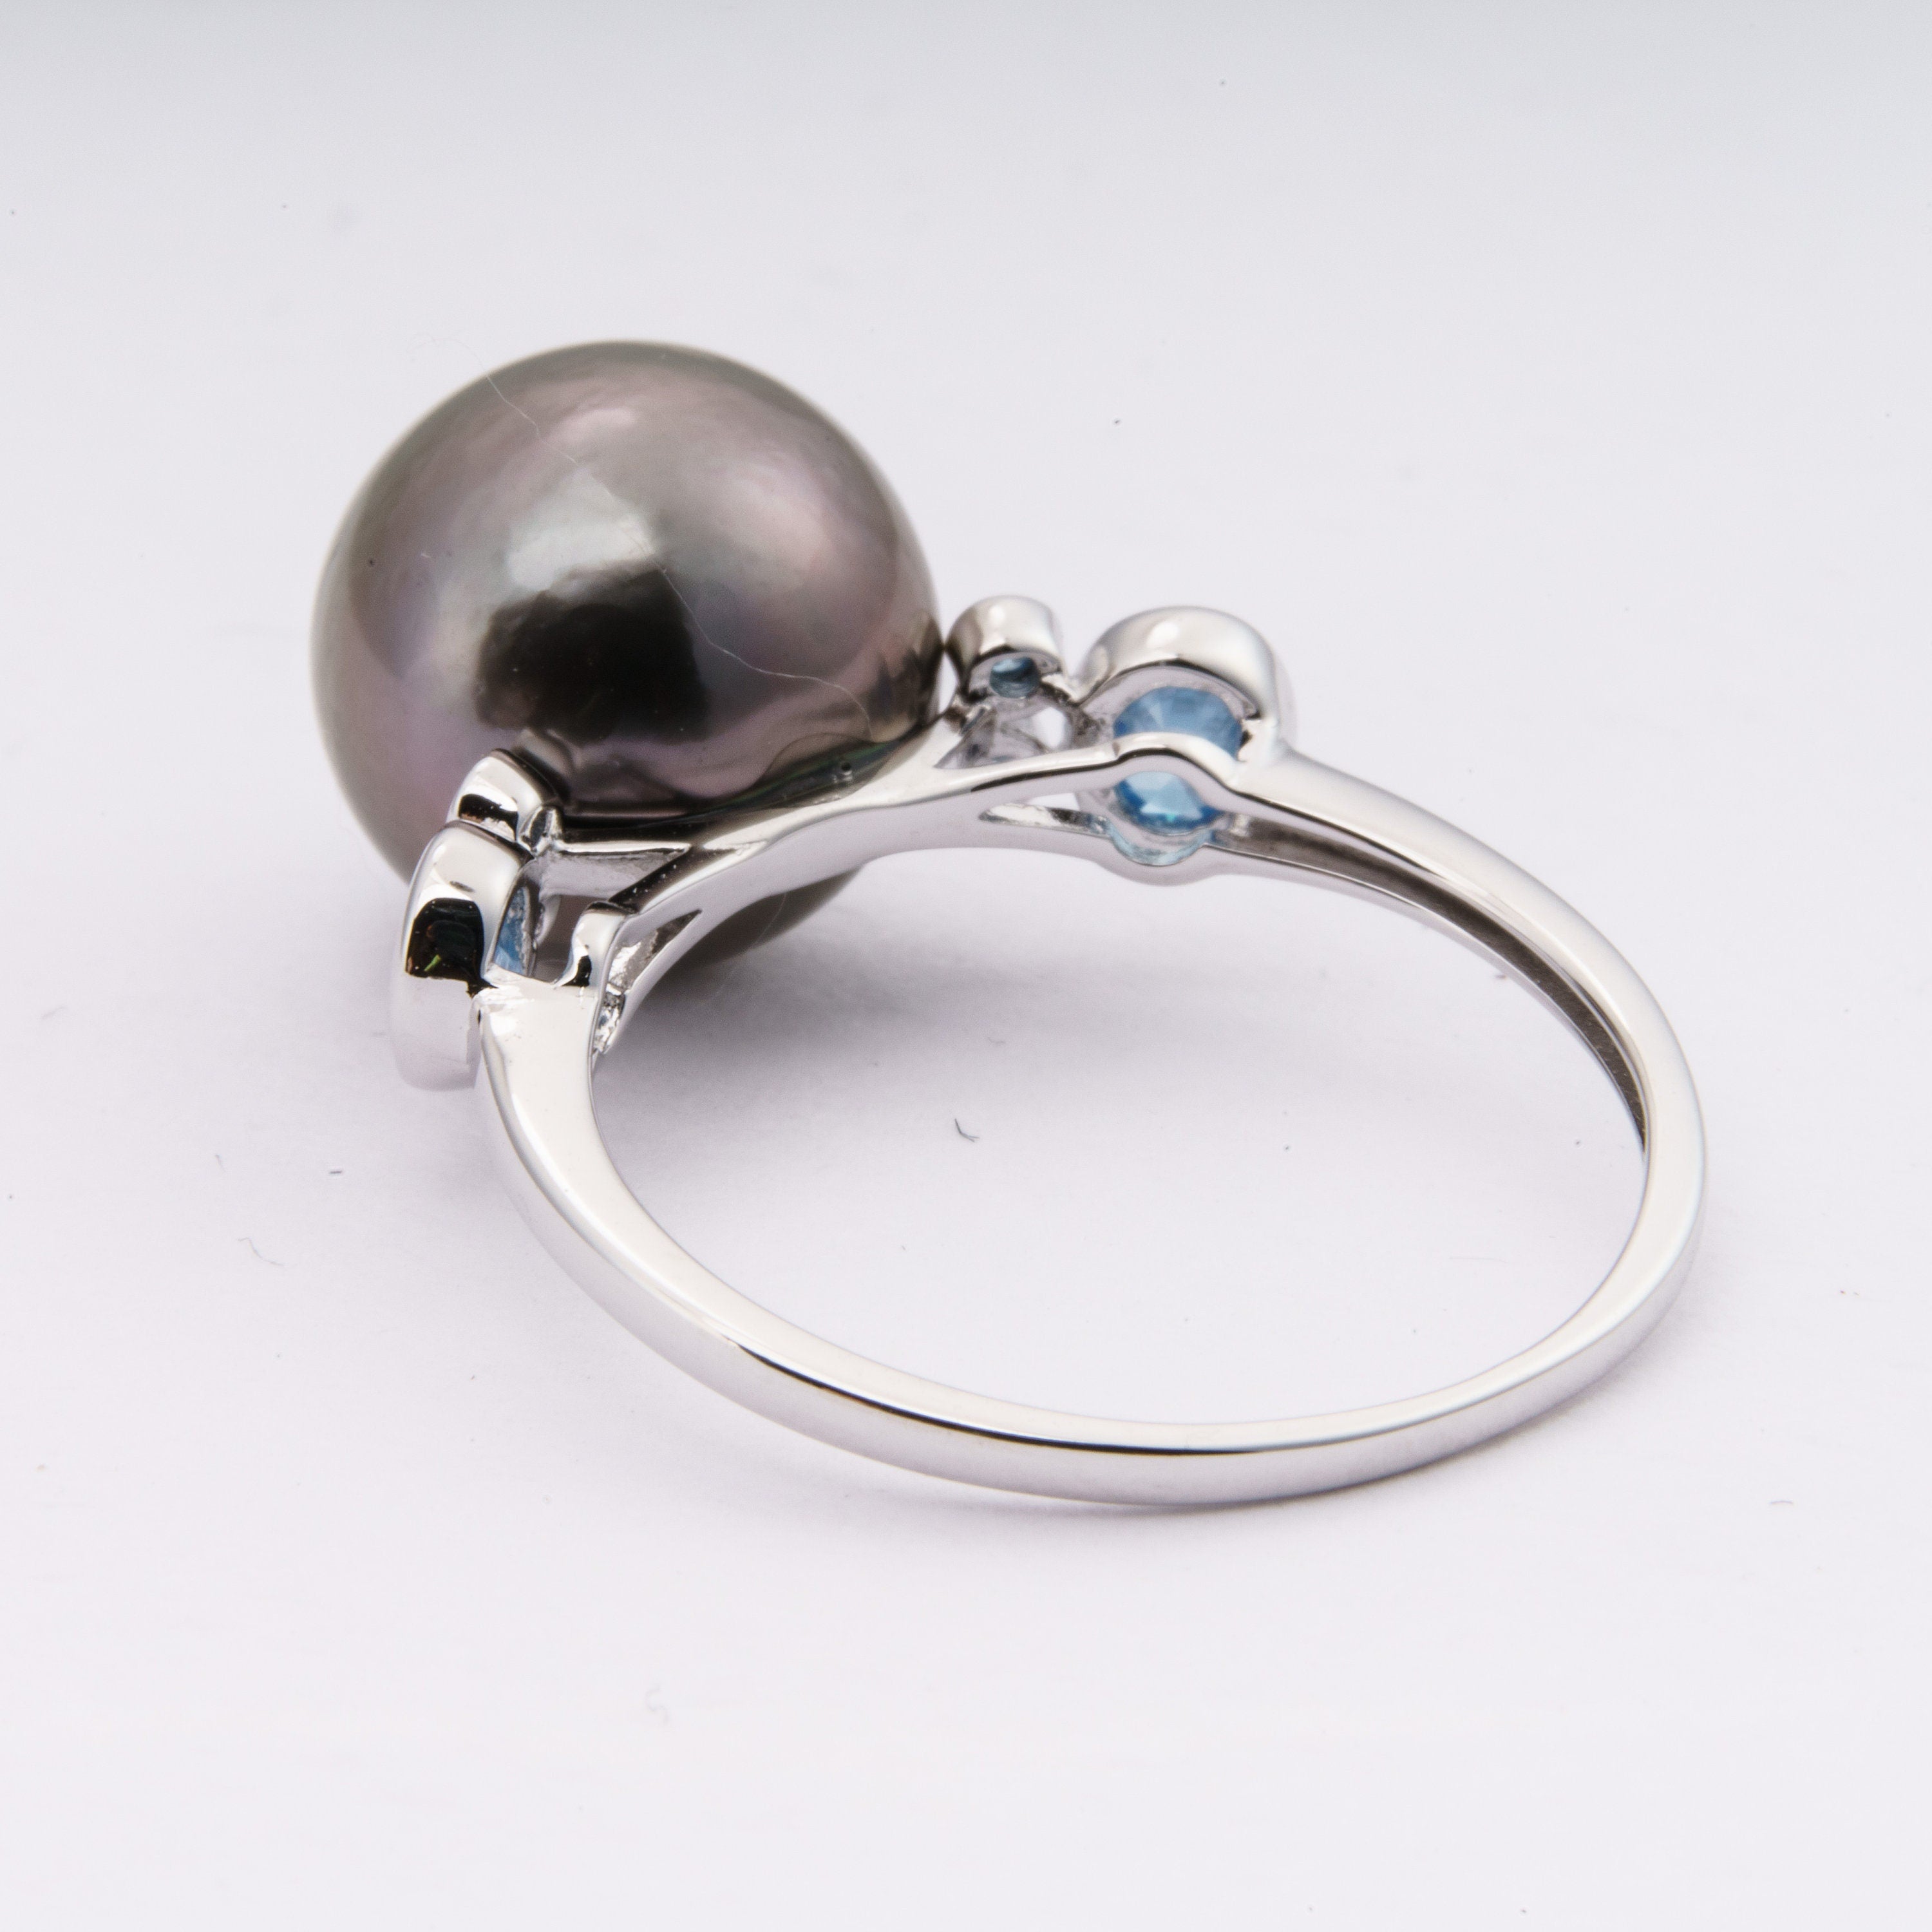 11mm tahitian pearl ring, size 7.5 us, 925 sterling silver with cubic zirconia